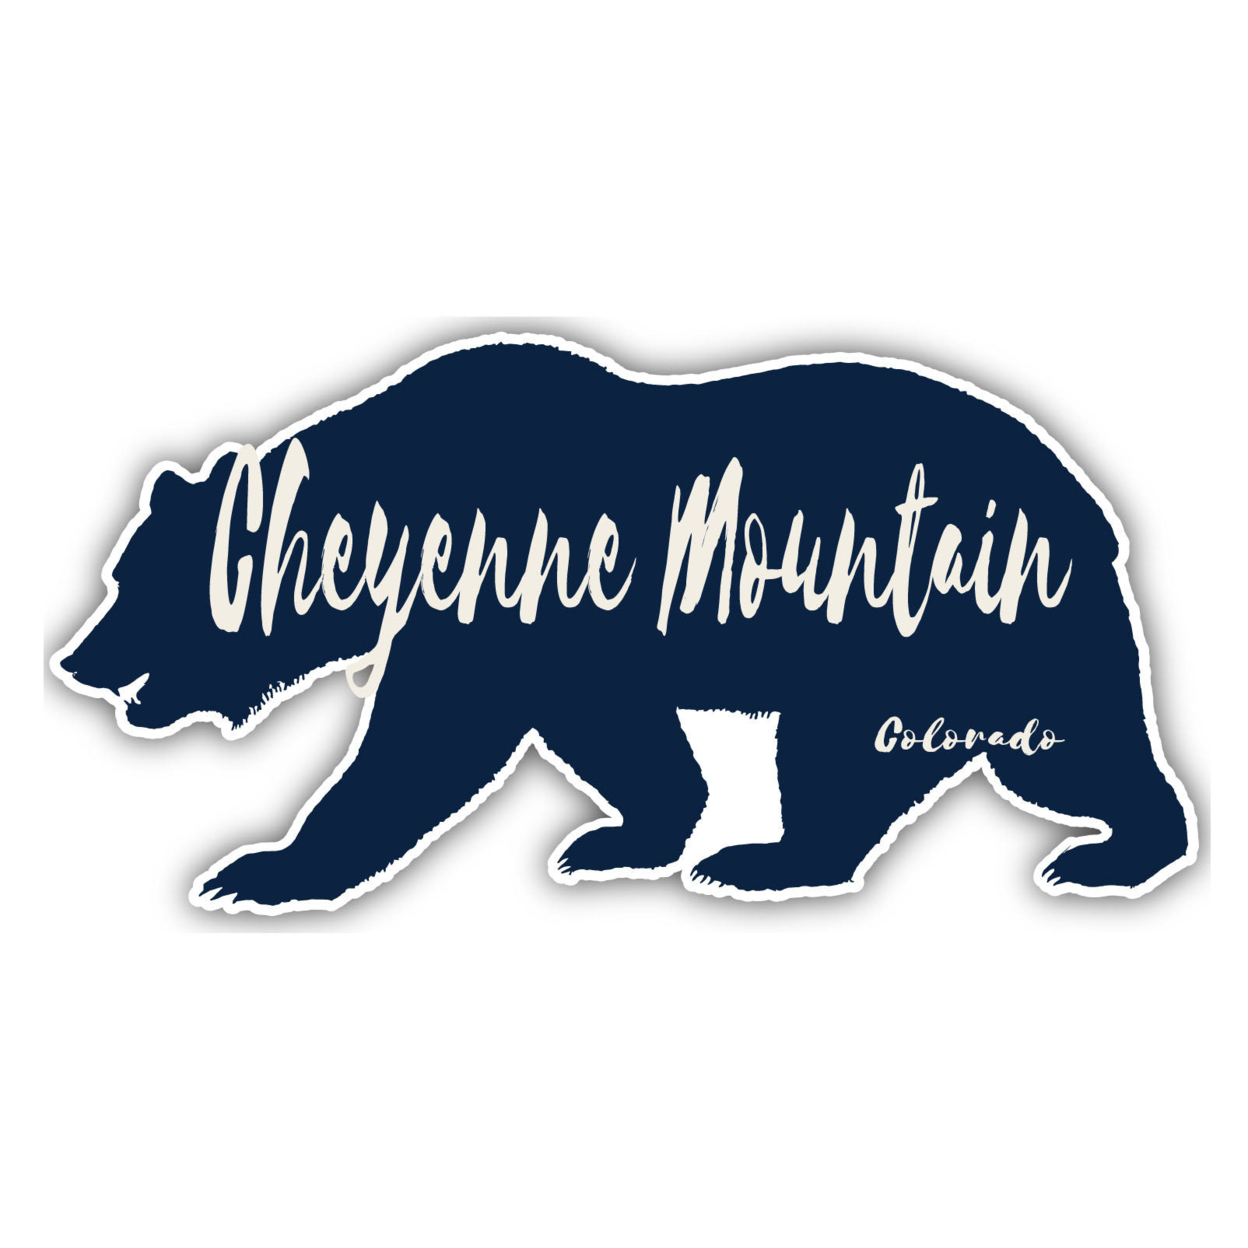 Cheyenne Mountain Colorado Souvenir Decorative Stickers (Choose Theme And Size) - 4-Pack, 10-Inch, Camp Life